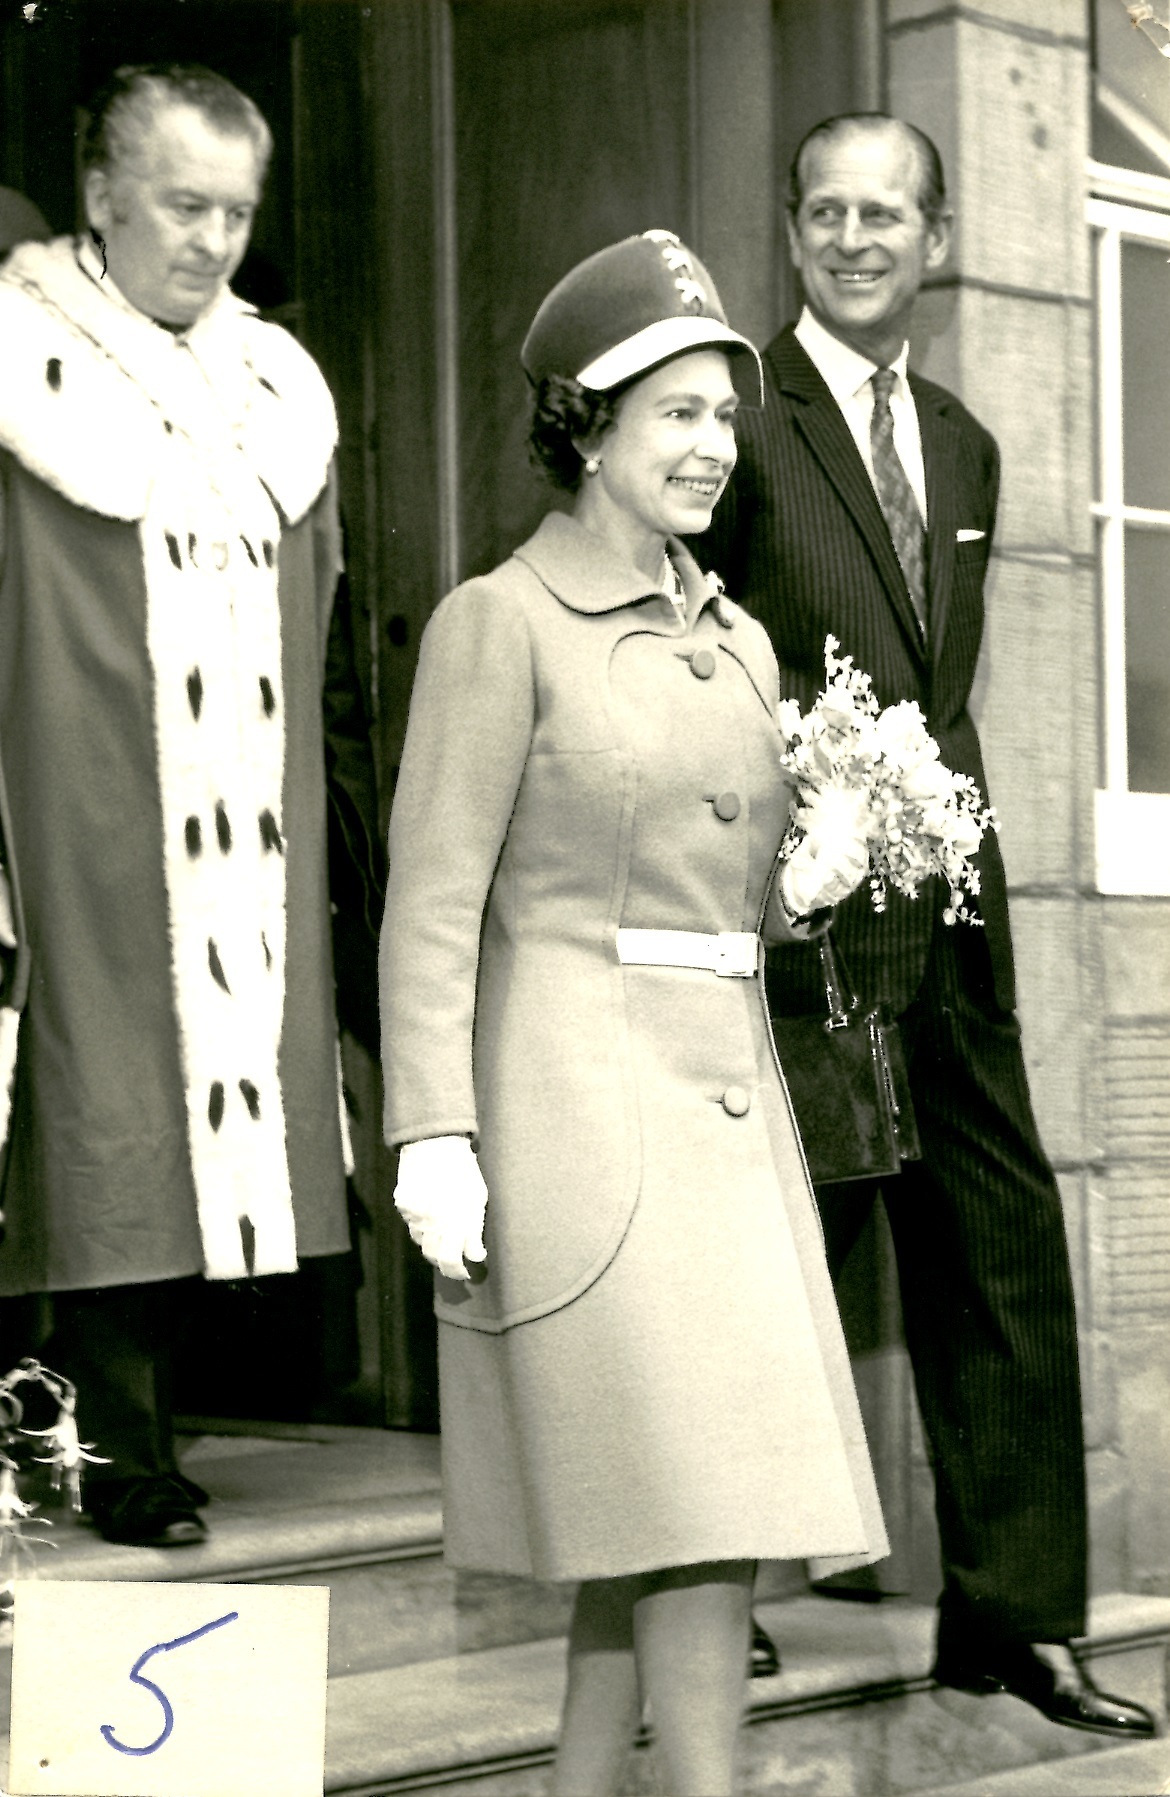 The Queen and Prince Philip with the Provost of Haddington, Fraser Spowage, on the steps of Haddington Town House in July 1973. Image: East Lothian Council Archives, John Gray Centre